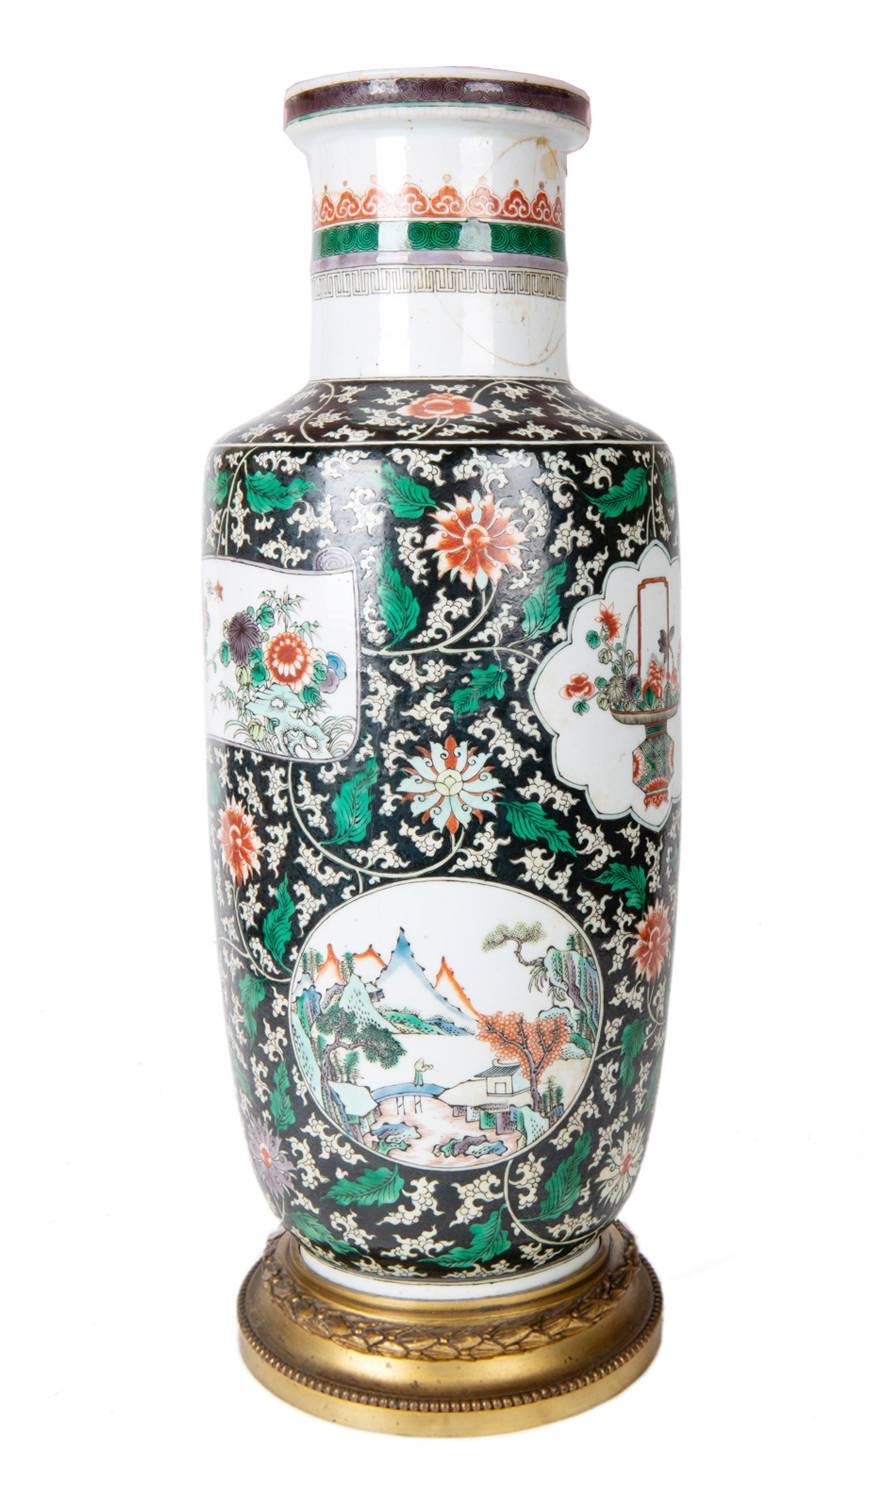 A very good quality mid-19th century Chinese Famille verte vase / lamp. Having a black and green ground with classical flower and leaf decoration. The inset painted panels depicting picturesque mountain scenes with builds and baskets of flowers.